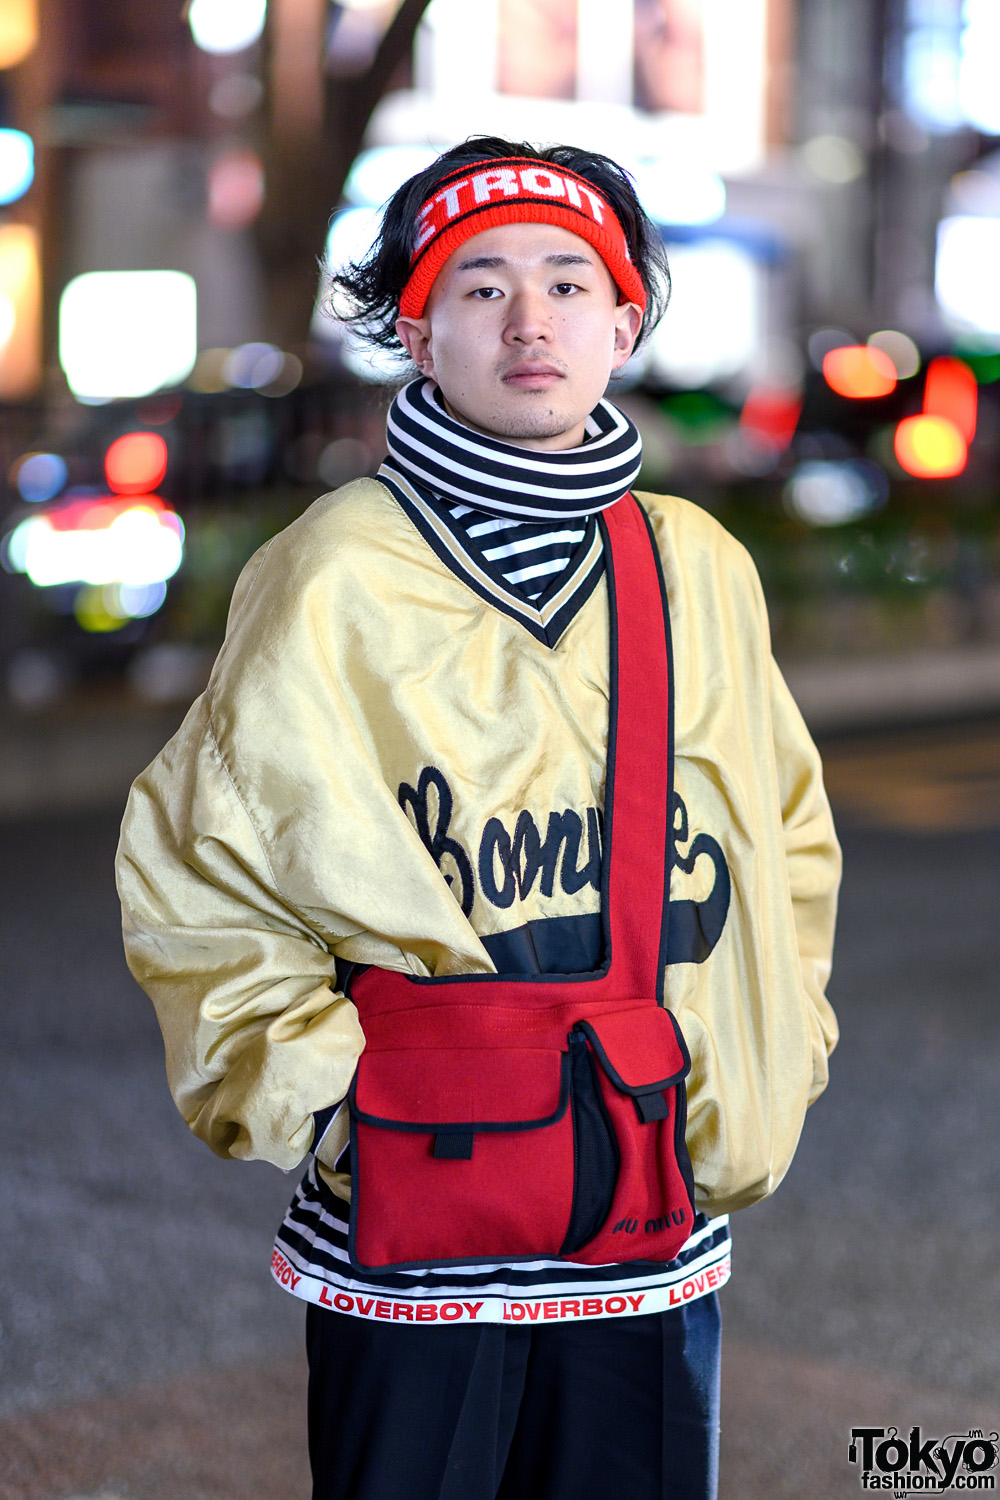 Japanese Eclectic Street Styles w/ Charles Jeffrey Loverboy